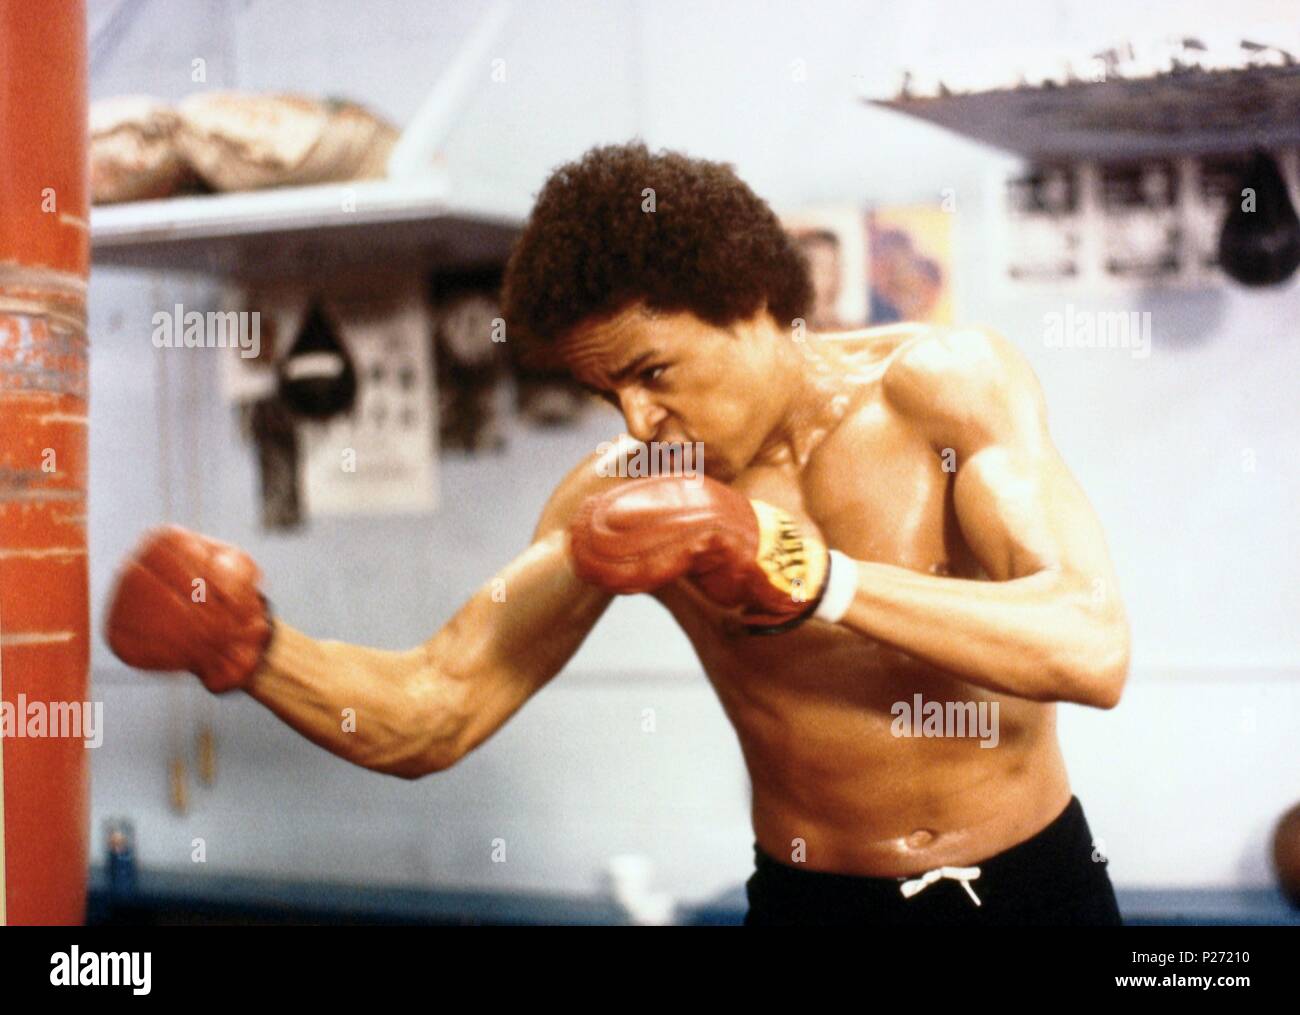 Original Film Title: BODY AND SOUL. English Title: BODY AND SOUL. Film  Director: GEORGE BOWERS. Year: 1981. Stars: LEON ISAAC KENNEDY. Credit:  CANNON FILMS / Album Stock Photo - Alamy